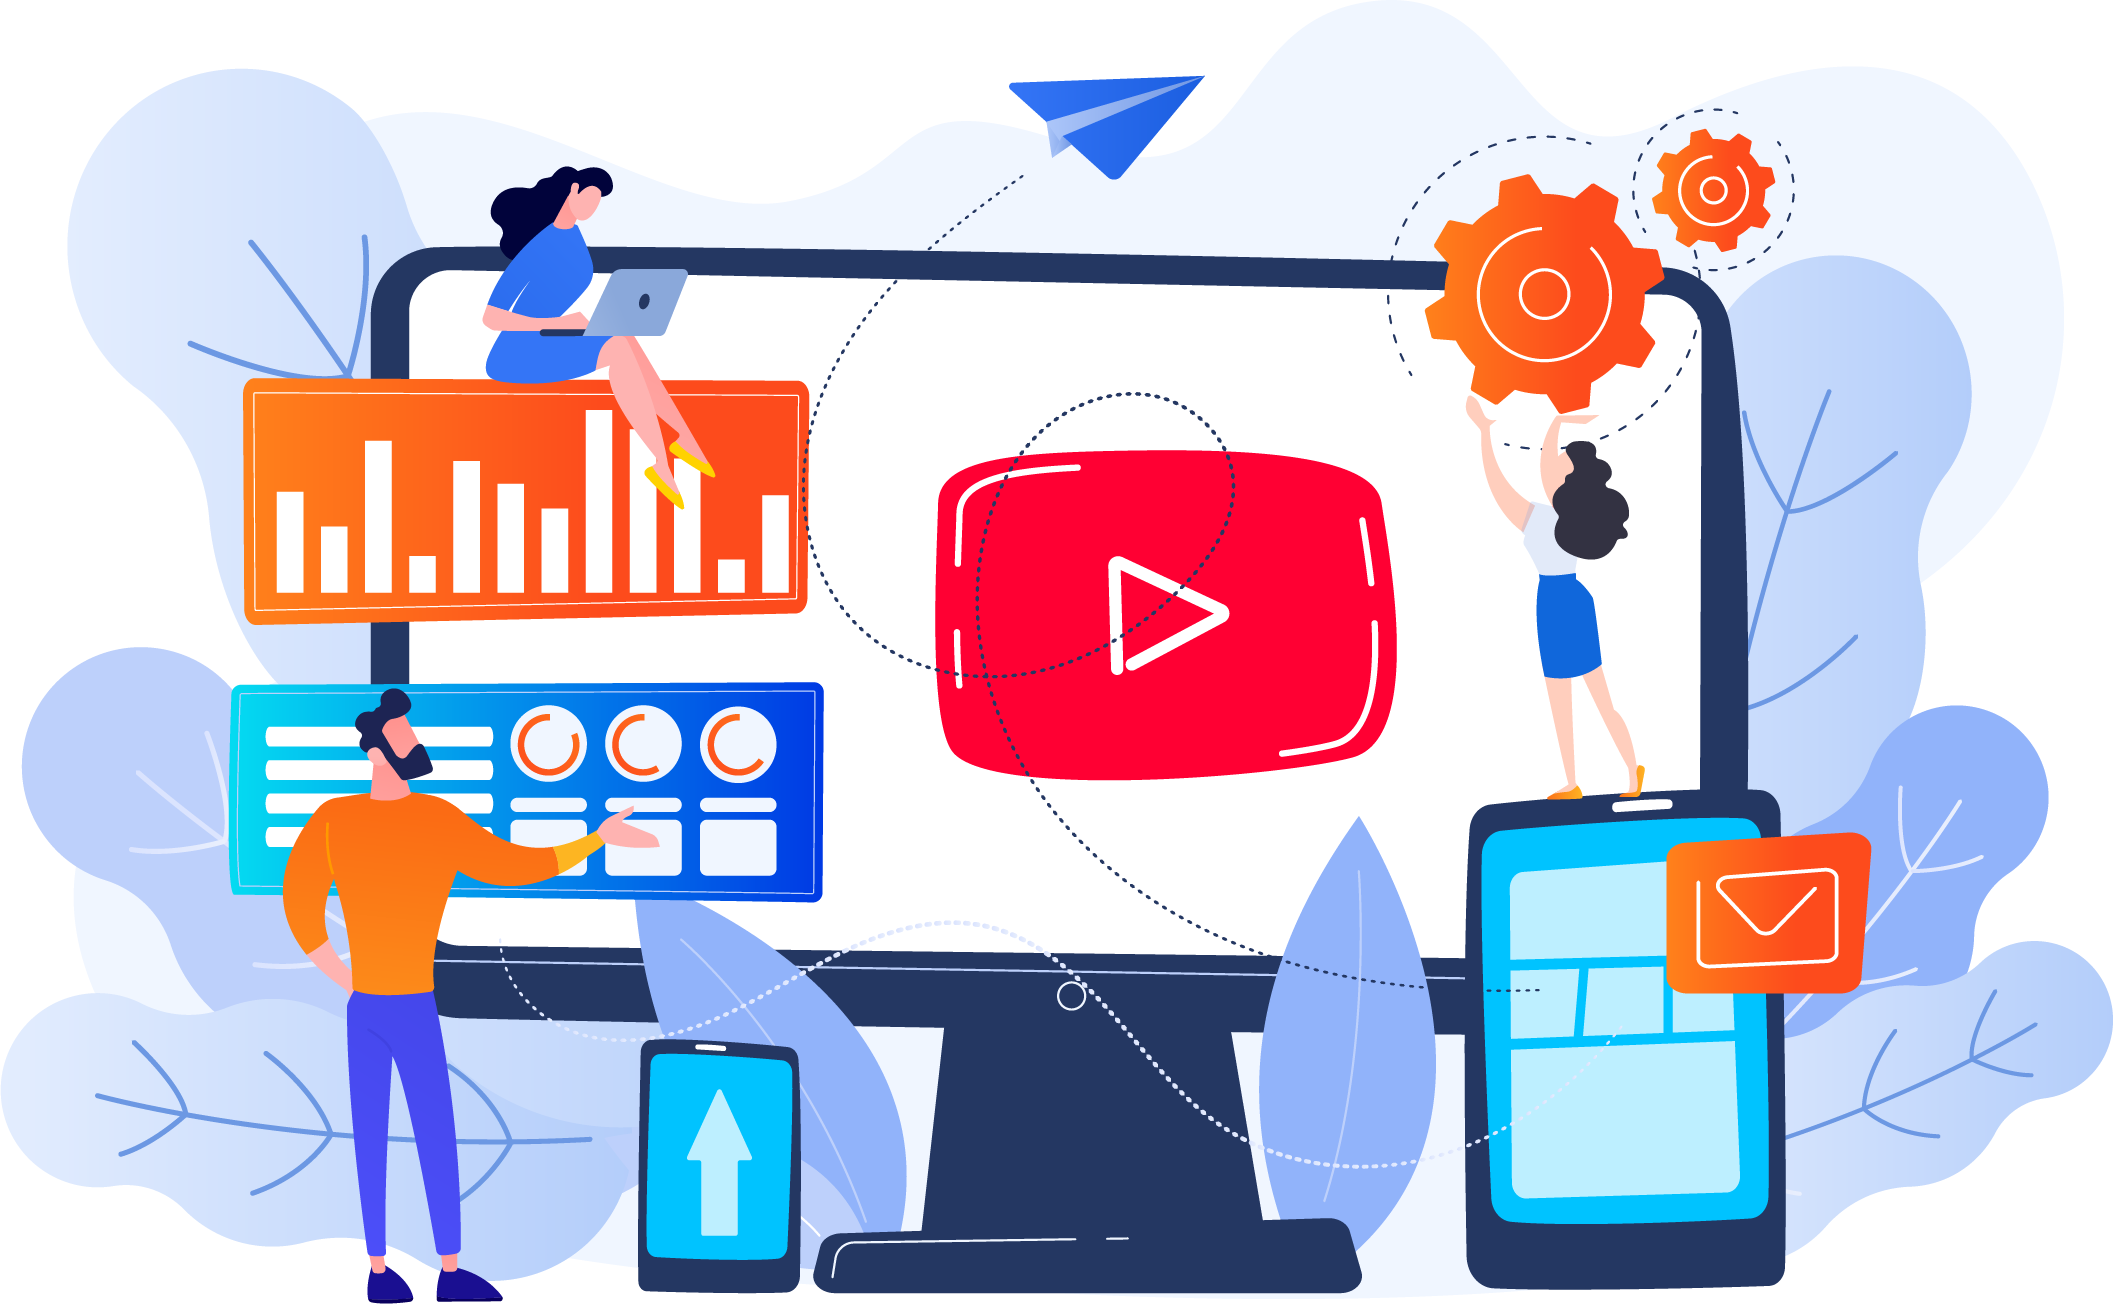 youtube channel management services India - Triffid Marketing Ahmedabad, India